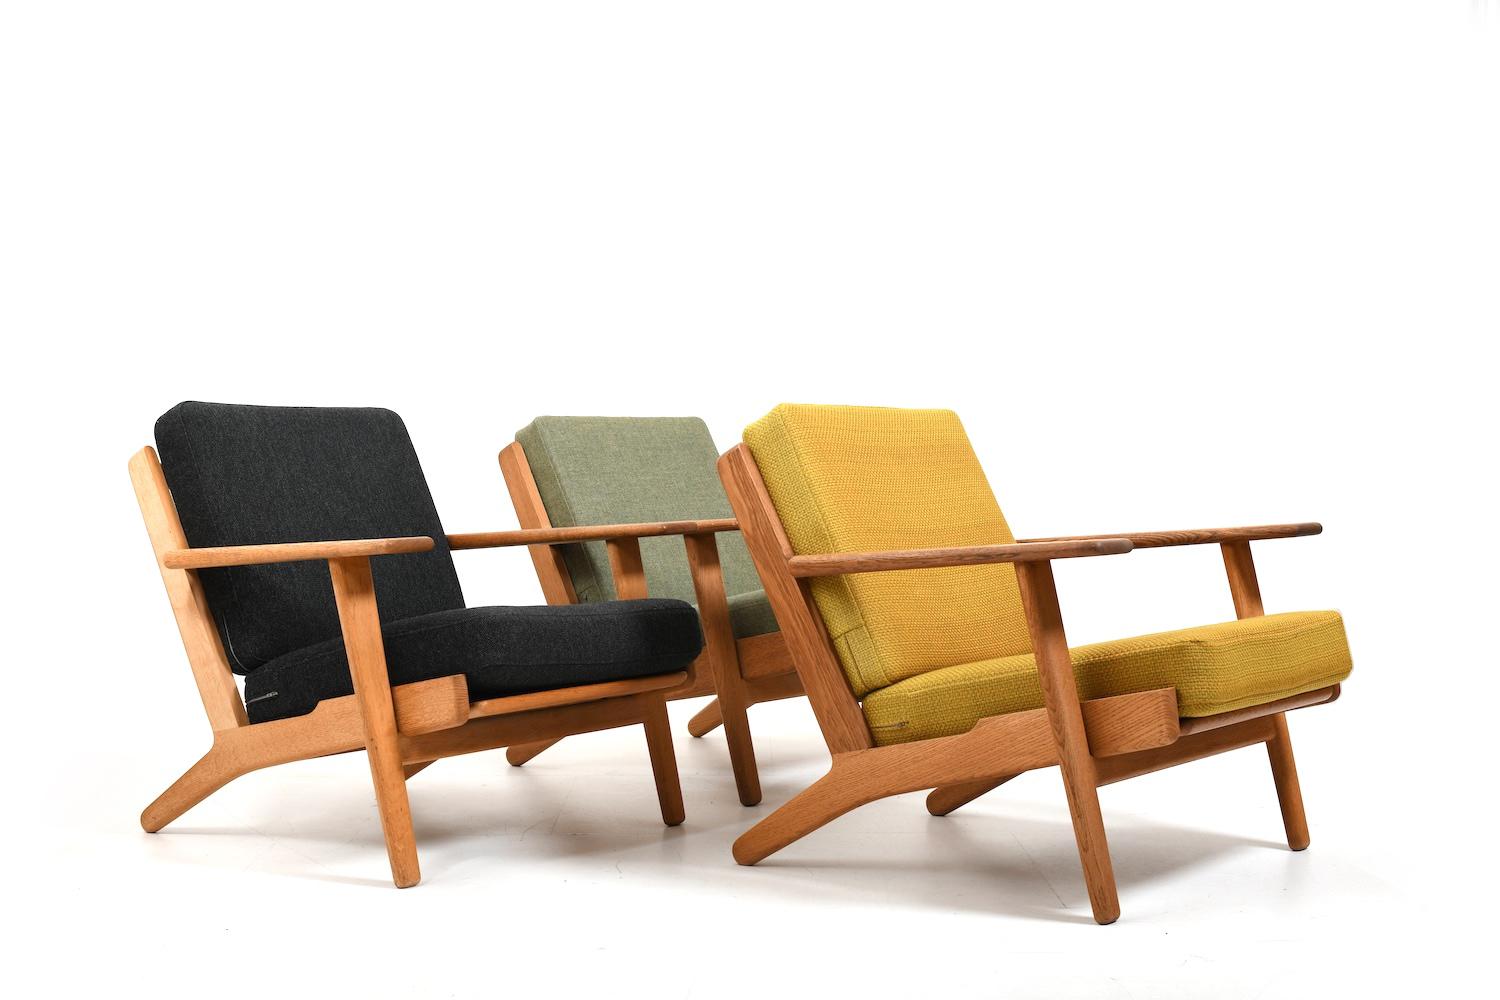 GE-290 easychairs by Hans J. Wegner for Getama Denmark 1950s. Made in solid oak. Original cushions and fabric in different colors. 